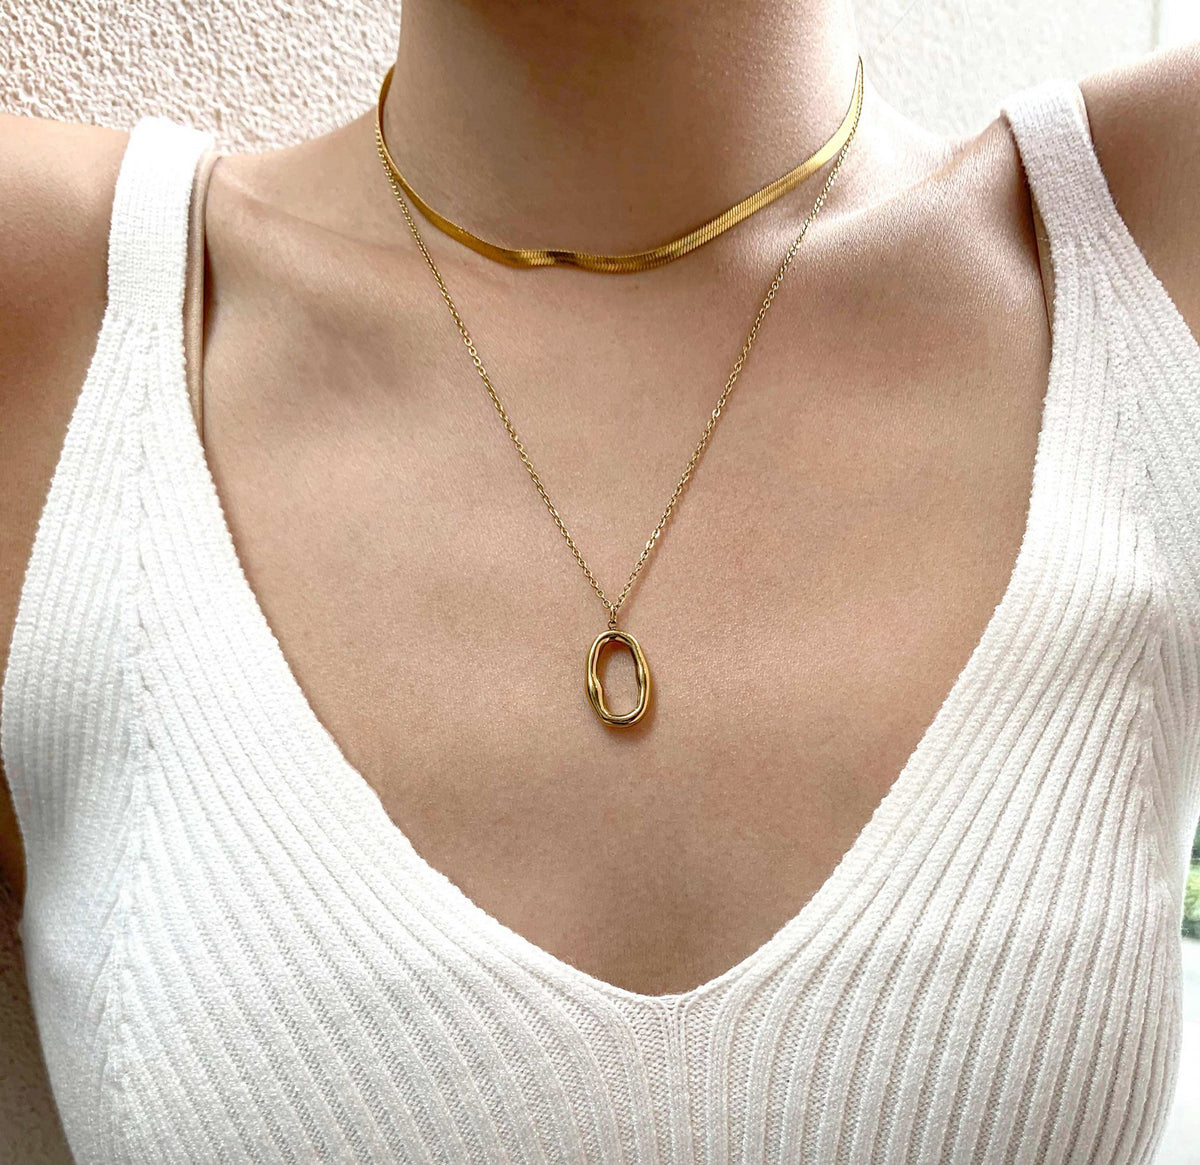 gold snake chain necklace adjustable